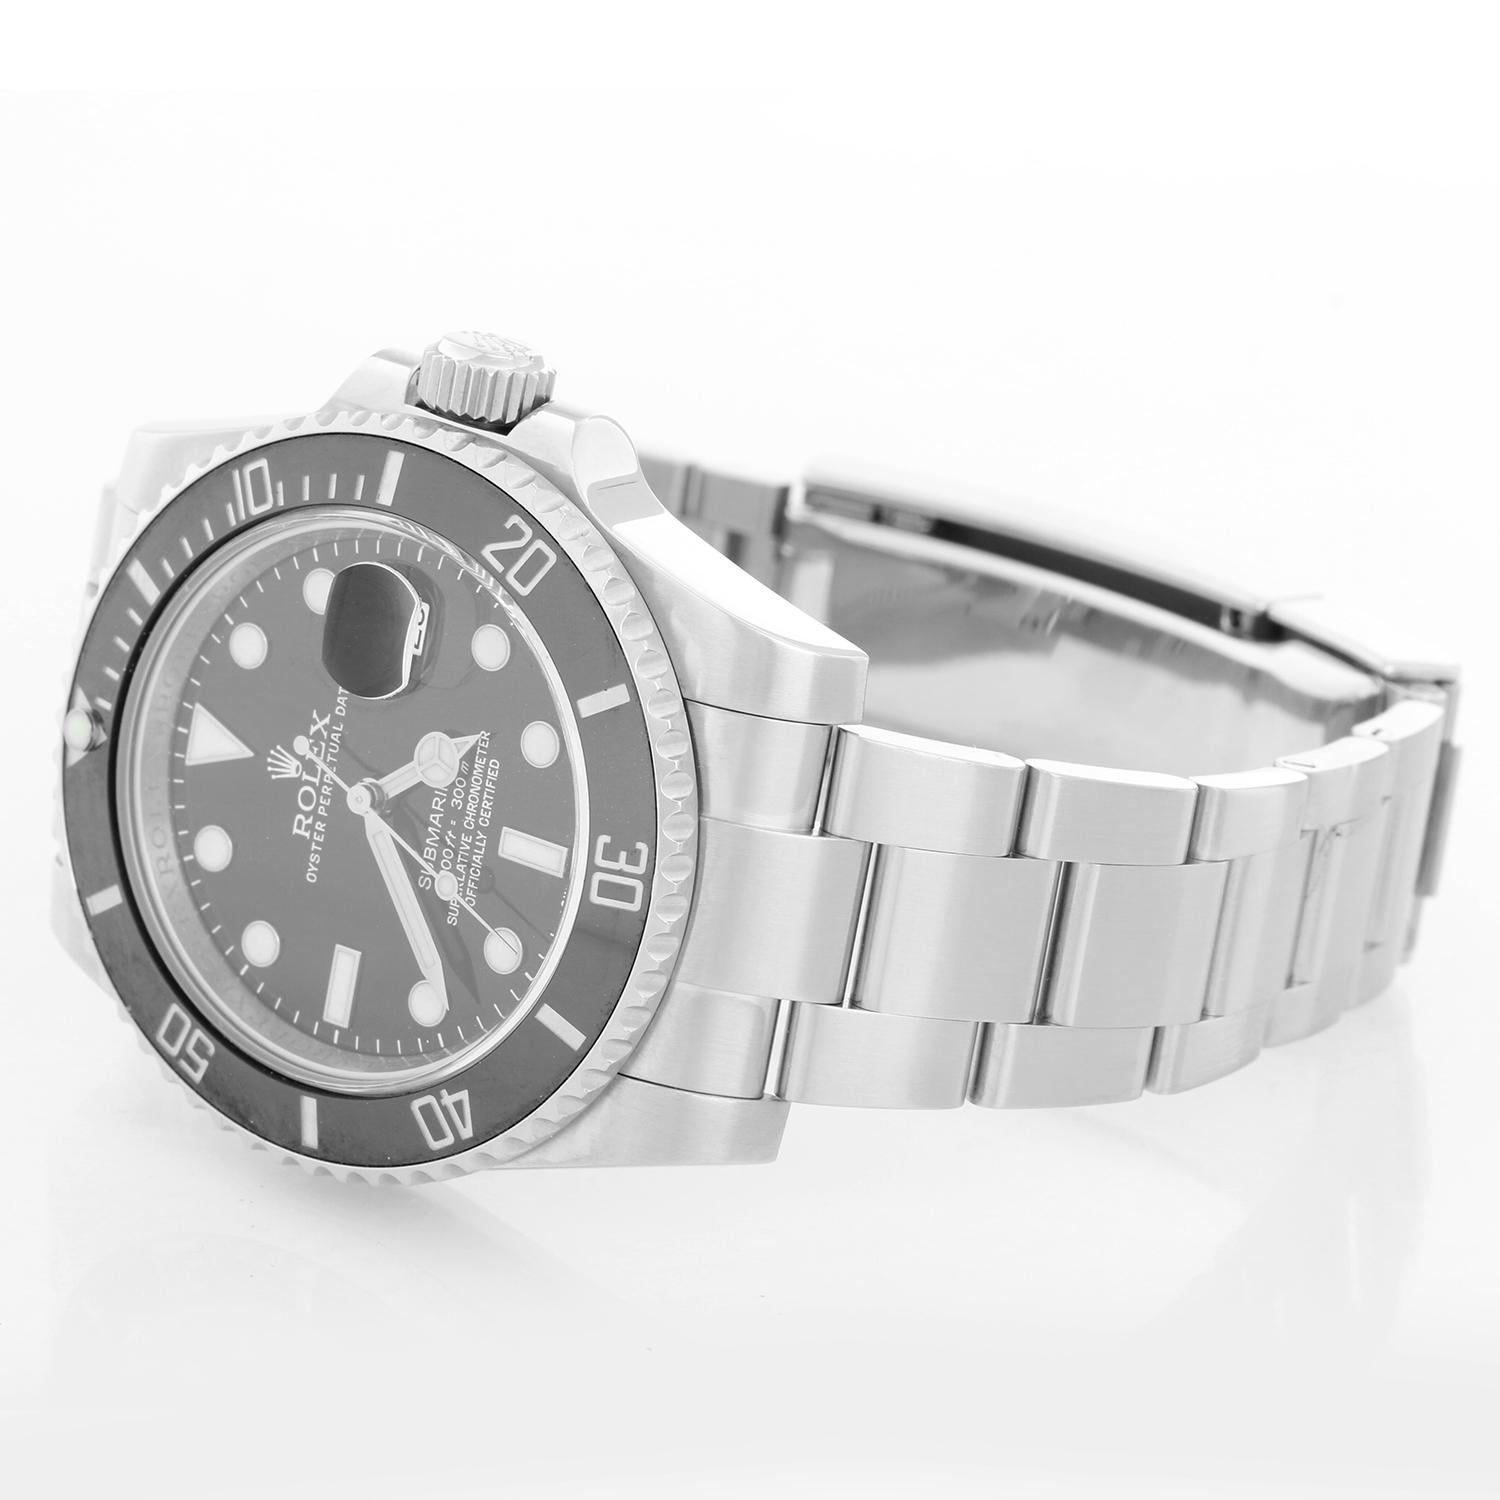 Rolex Submariner Men's Stainless Steel Watch 116610 - Automatic winding, 31 jewels, pressure proof to 1,000 feet. Stainless steel case with time-lapse Cerachrom bezel . Black dial with luminous markers; date at 3 o'clock. Stainless steel and Oyster